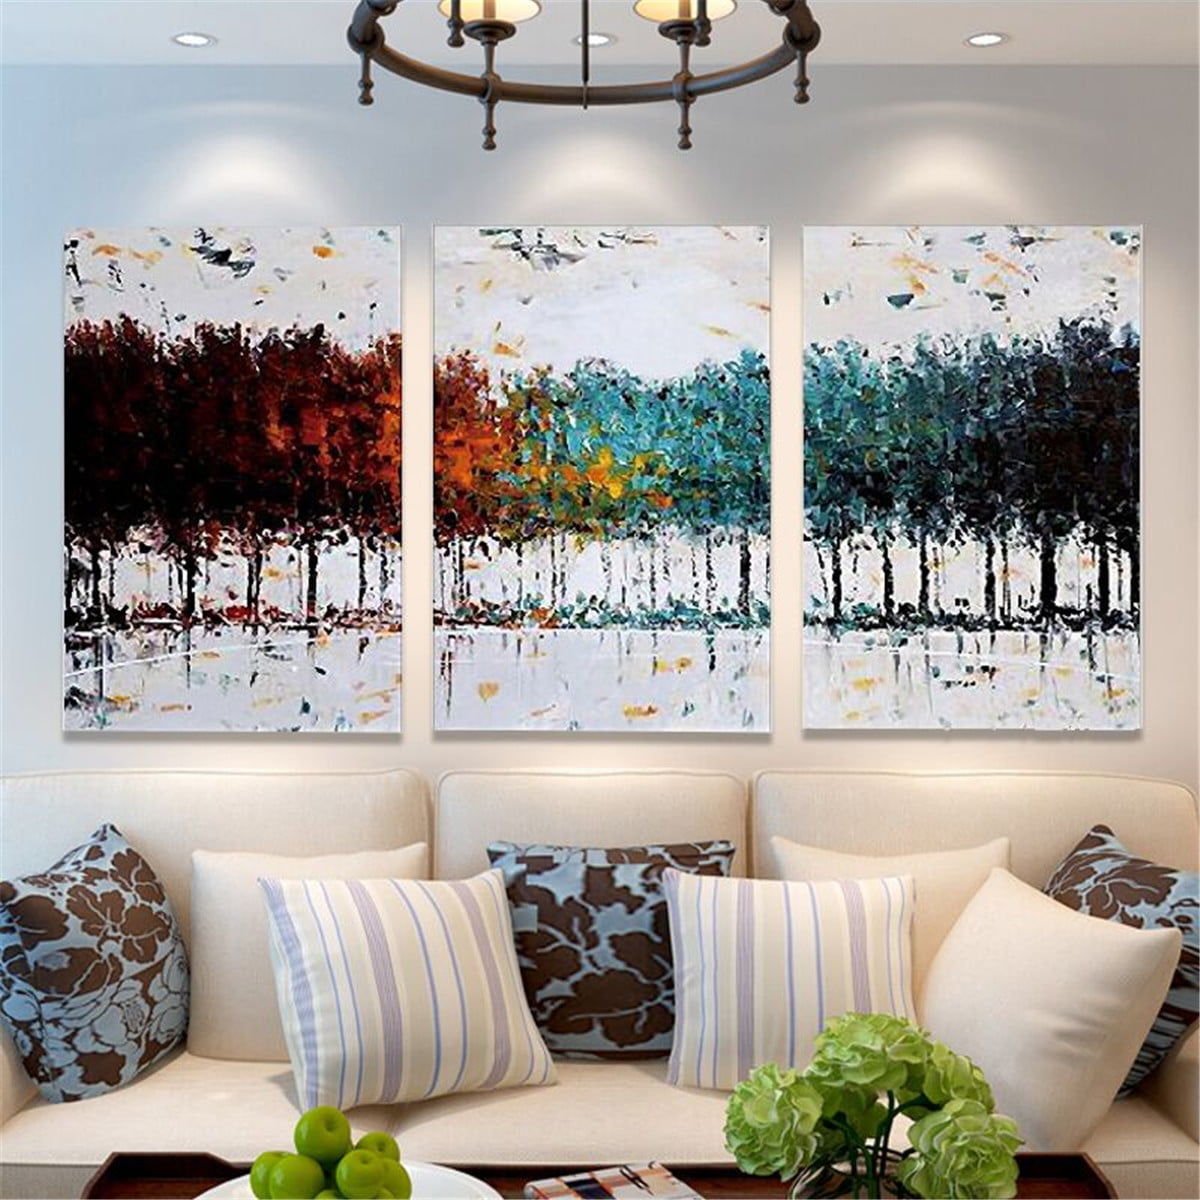 3 Pieces Panel Framed Abstract Tree Canvas Print Art Oil Painting